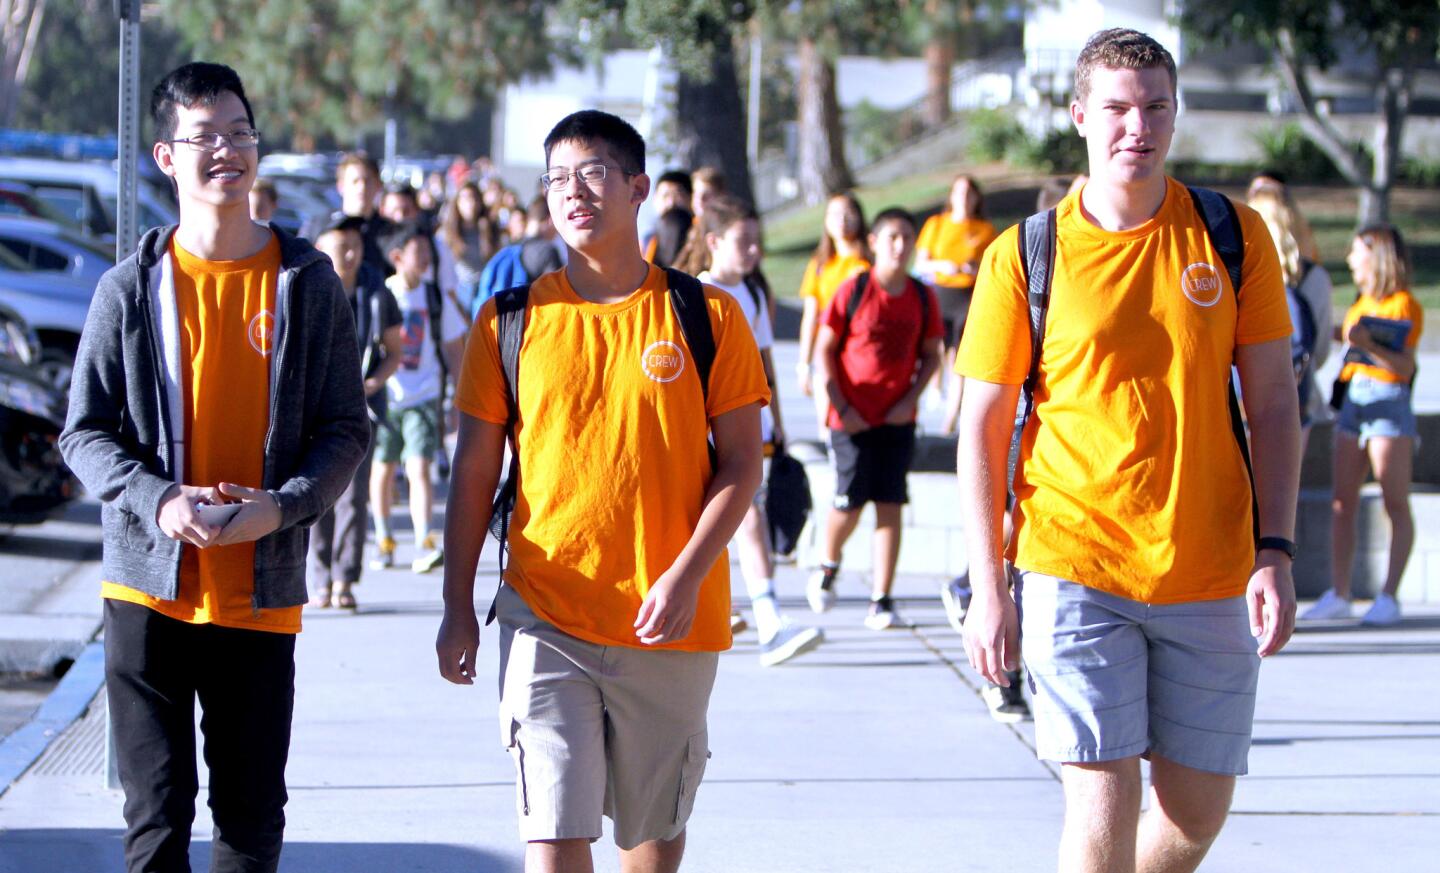 La Cañada High School seniors and members of the school's Link Crew Freshmen Mentorship Program, from left, Jesper Ploysangngam, Johnny Wang and Andrew Gray arrive for the first day of school at the La Cañada Flintridge high school on Tuesday, August 16, 2016.